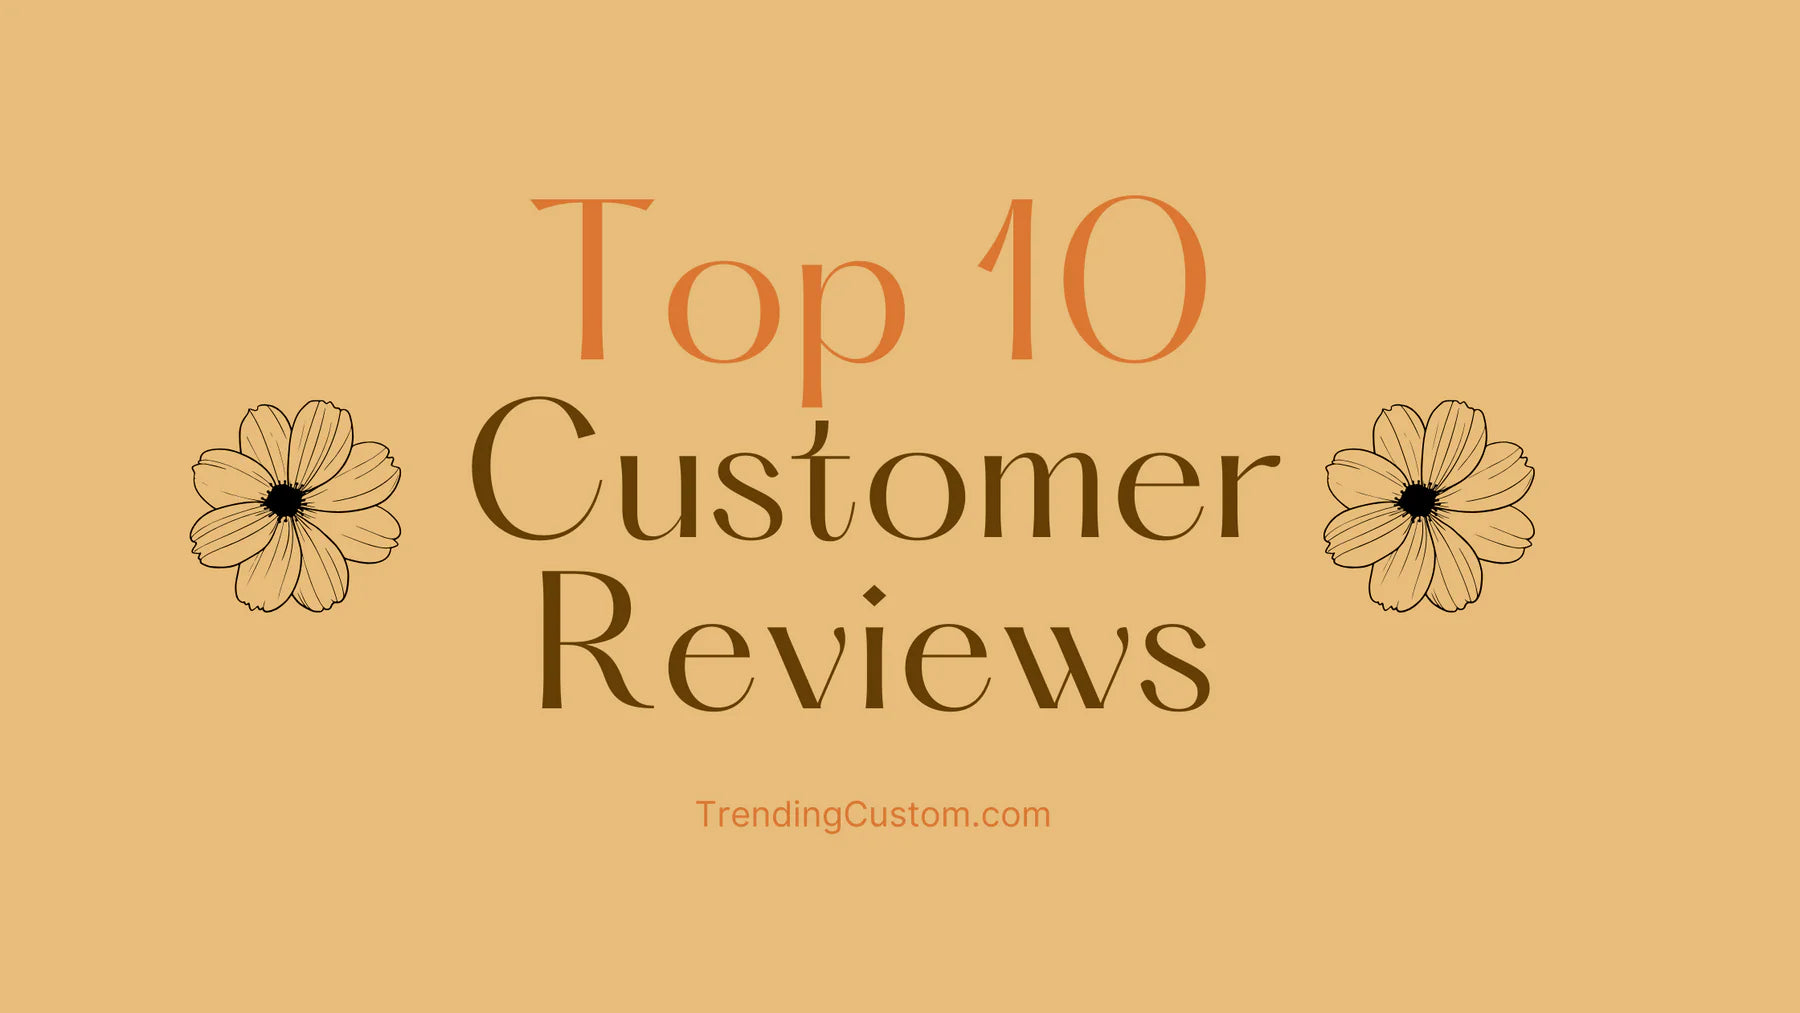 Top 10 Raving Reviews: Our Customers Speak Out! - February 25th